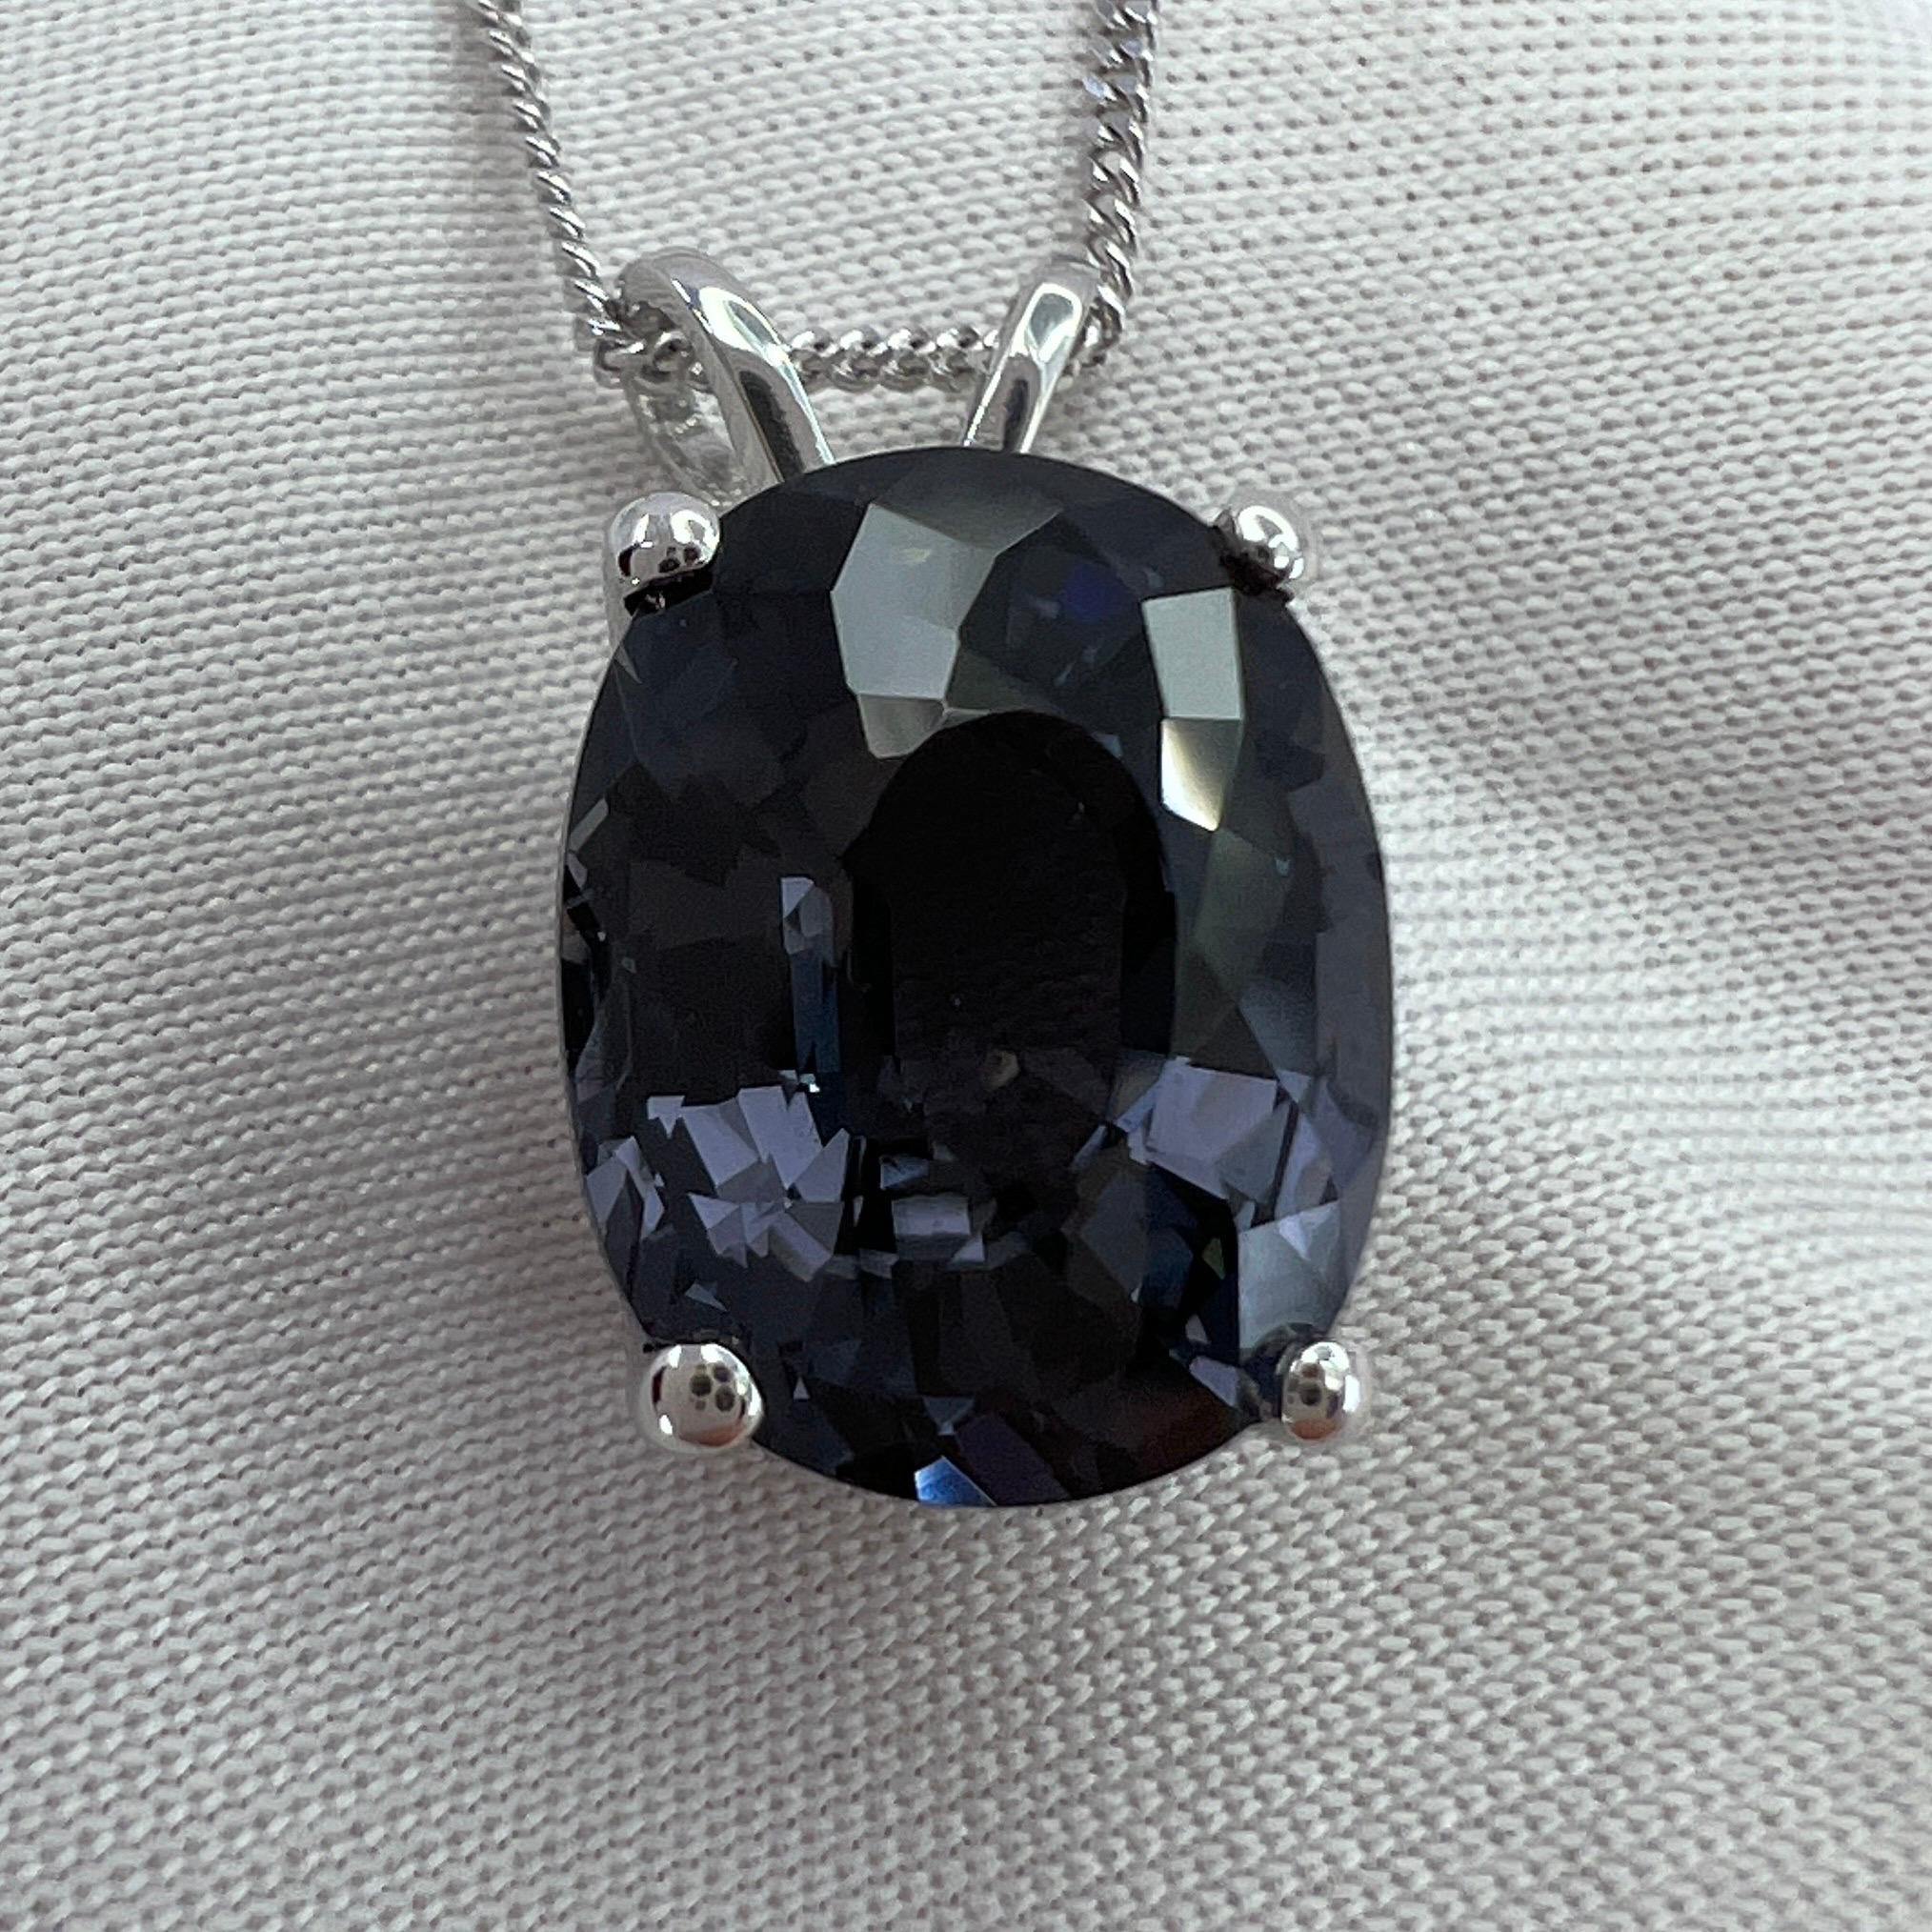 Rare Purple Gray Titanium Spinel Fancy Oval Cut 18k White Gold Solitaire Pendant Necklace.

Large 5.21 Carat spinel with a beautiful greyish blue purple colour. Often called titanium in the trade. This spinel has an excellent fancy oval cut also